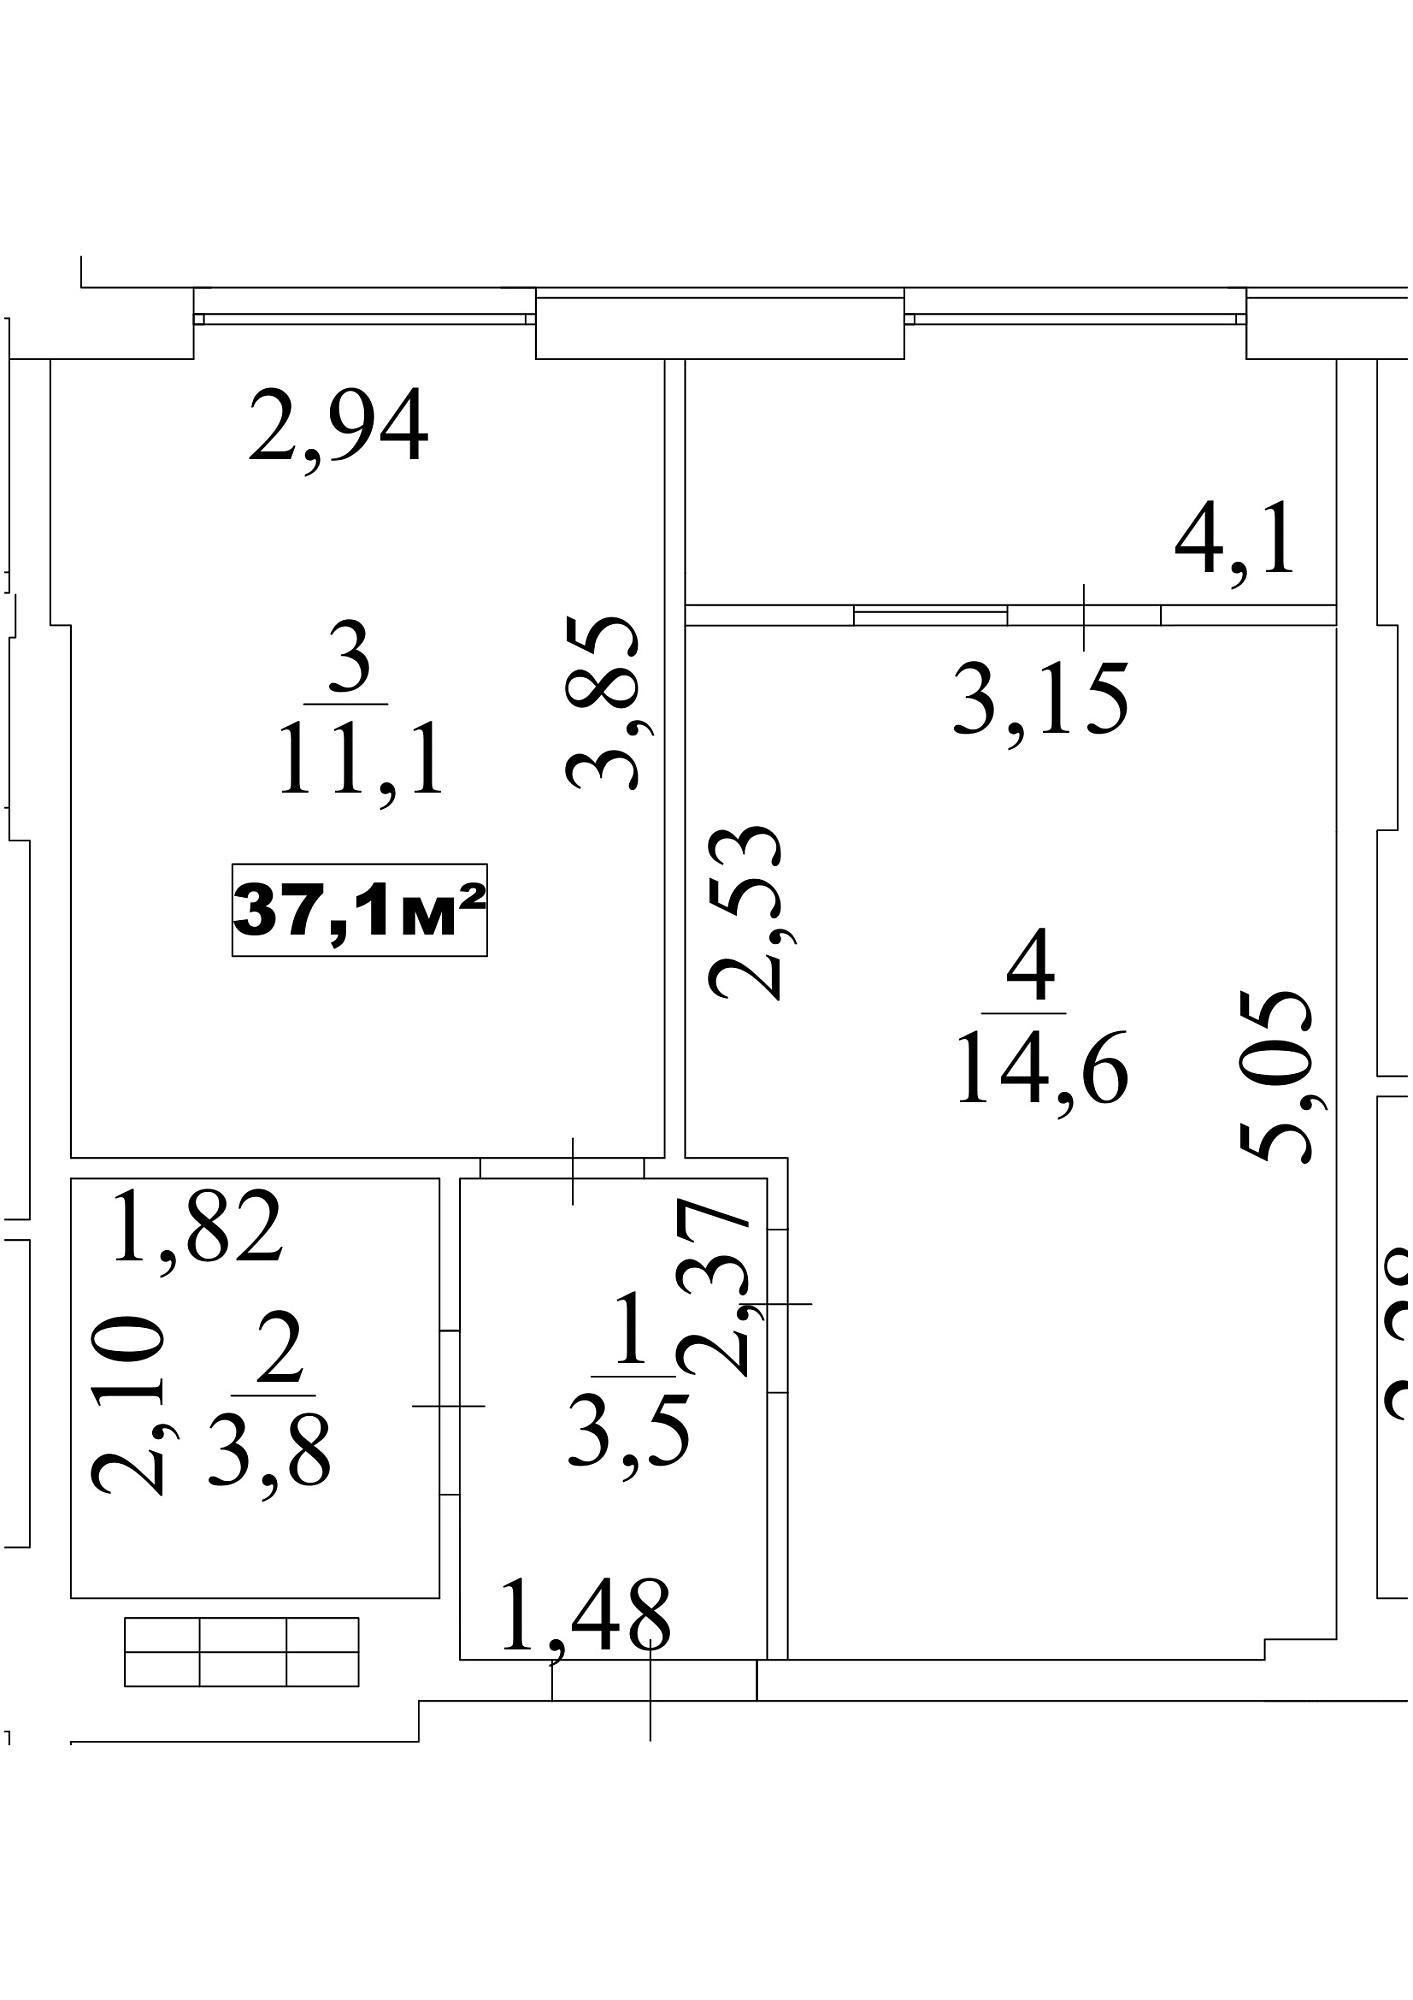 Planning 1-rm flats area 37.1m2, AB-10-09/00078.